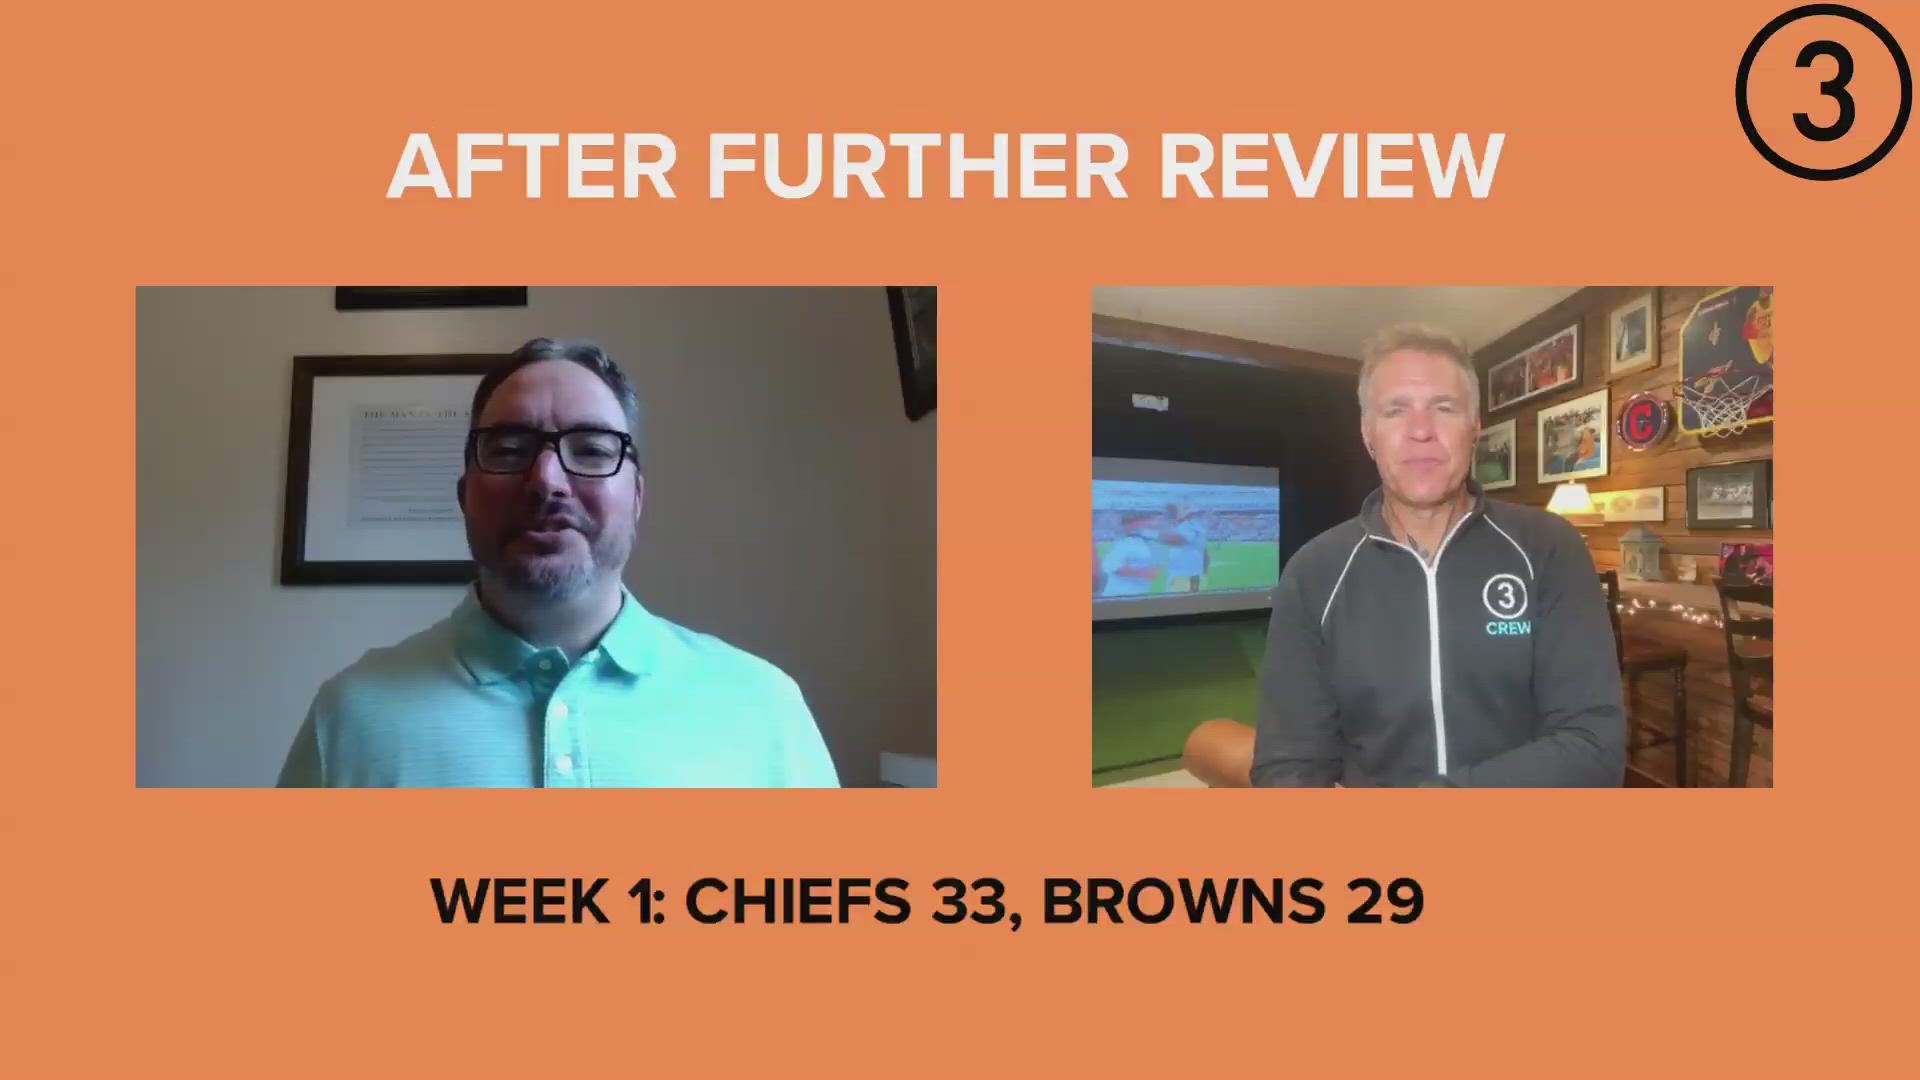 Jay and Dino analyze the key moments in the Browns' 33-29 loss to the Chiefs in Kansas City.